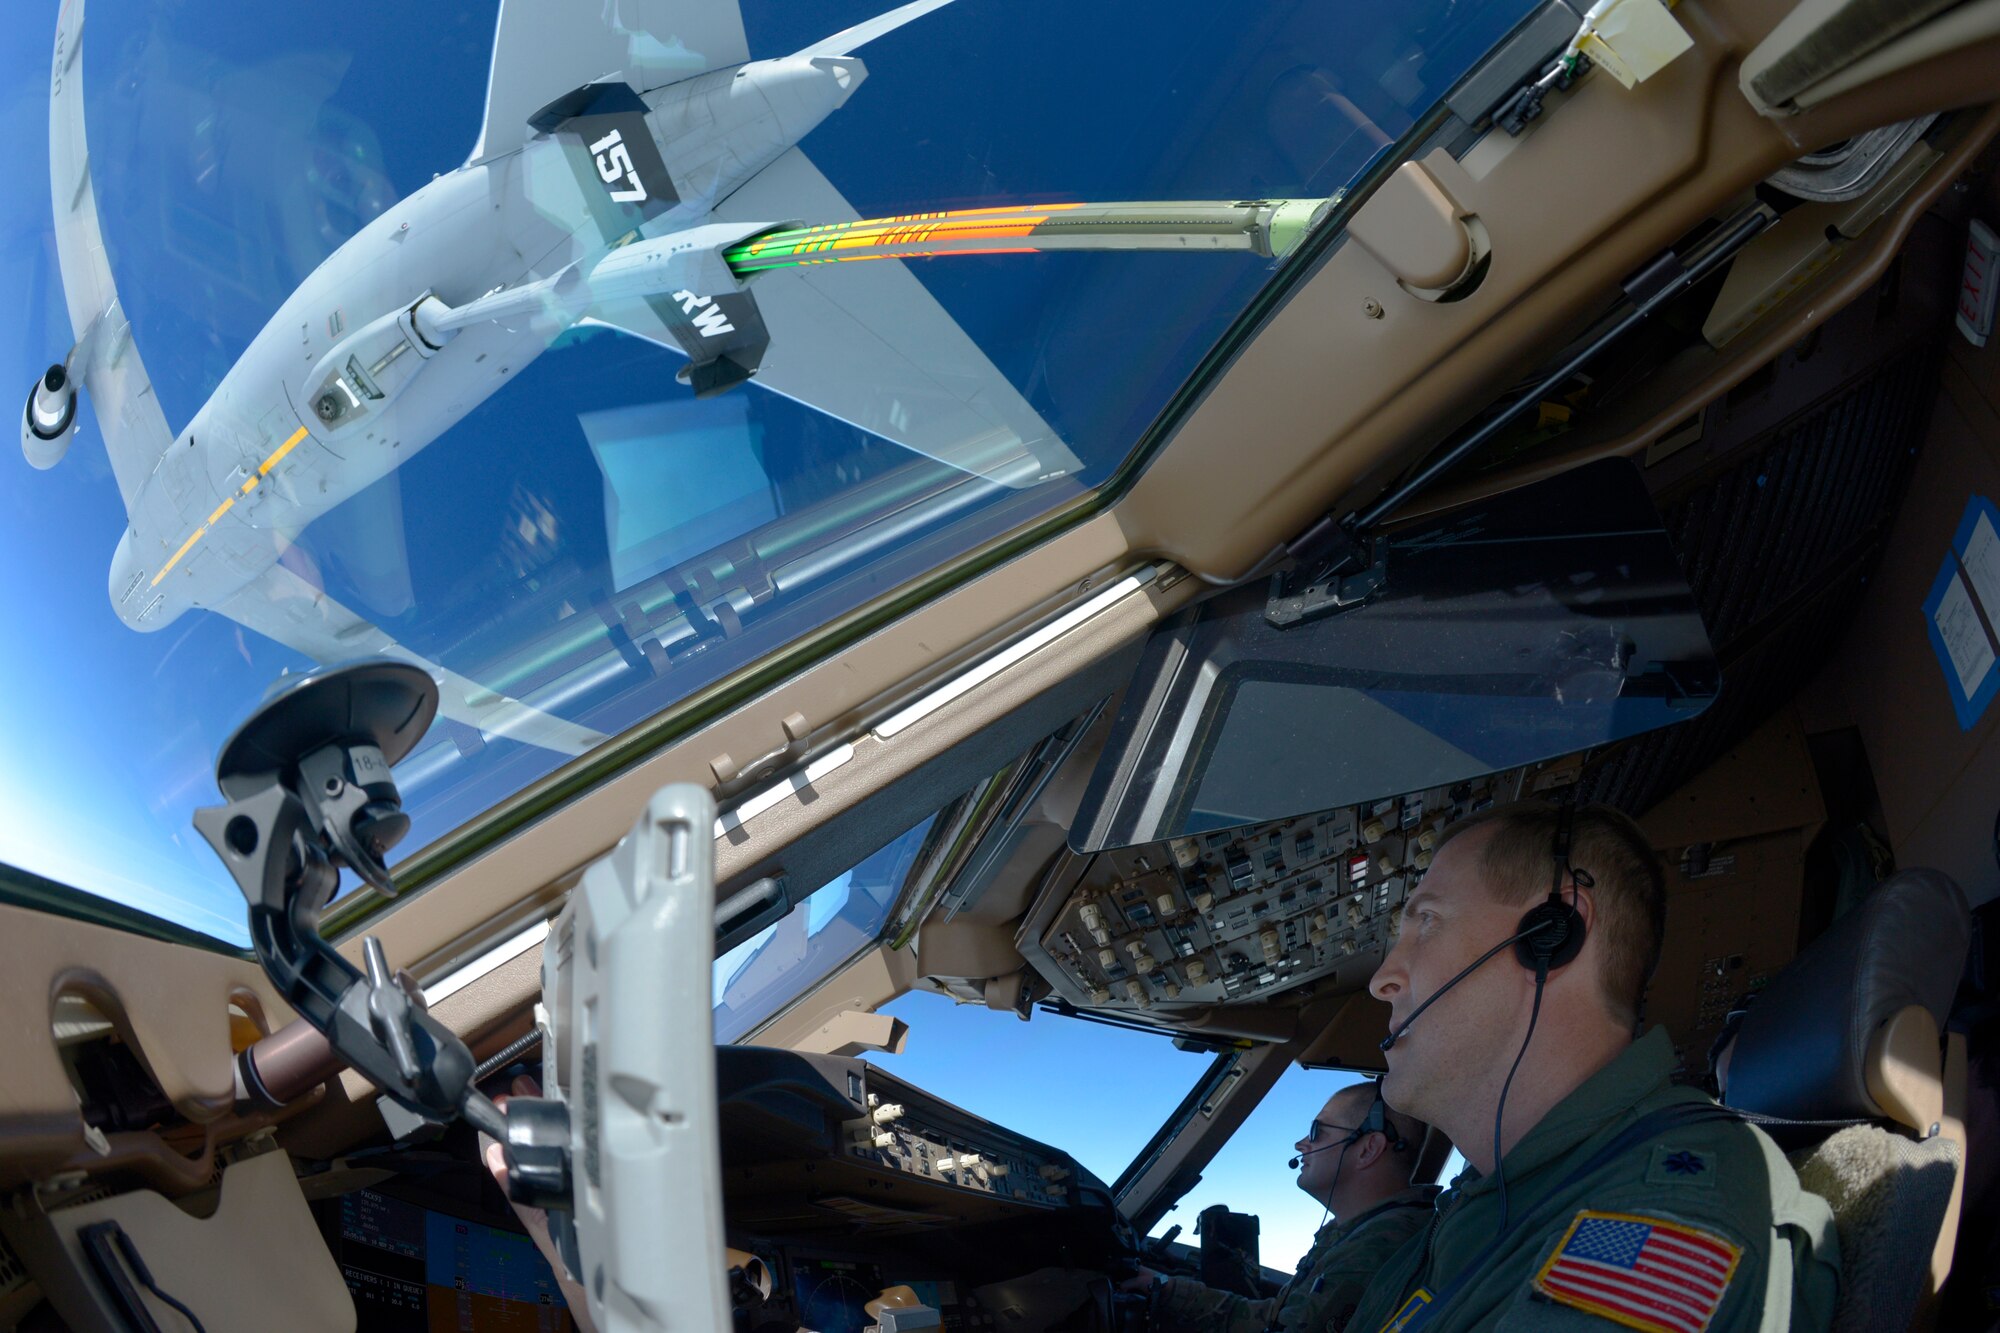 Lt. Col. Greg Van Splunder, Lt. Col. Brandon Stock and Tech. Sgt. Matt Rogers, all of the 157th Air Refueling Wing, Pease Air National Guard Base, New Hampshire Air National Guard, guide their KC-46A Pegasus as it receives fuel from another Pease KC-46A during a 36-hour endurance mission, Nov. 16, 2022. 

Lt. Col. Greg Van Splunder and Lt. Col. Brandon Stock, pilots with the 157th Air Refueling Wing, Pease Air National Guard Base, New Hampshire Air National Guard, guide their KC-46A Pegasus as it receives fuel from another Pease KC-46A during a 36-hour endurance mission, Nov. 16, 2022. 

The long-duration sortie took place from Nov. 16-17 and was crewed by active duty and Air National Guard Airmen from Pease, who flew the jet non-stop from New Hampshire, across North America and the Pacific Ocean, around Guam, and back home again. The proof-of-concept operation showcased the ability of the Air Force’s newest tanker to project the force in the modern battle space. (U.S. Air National Guard photo by Senior Master Sgt. Timm Huffman)